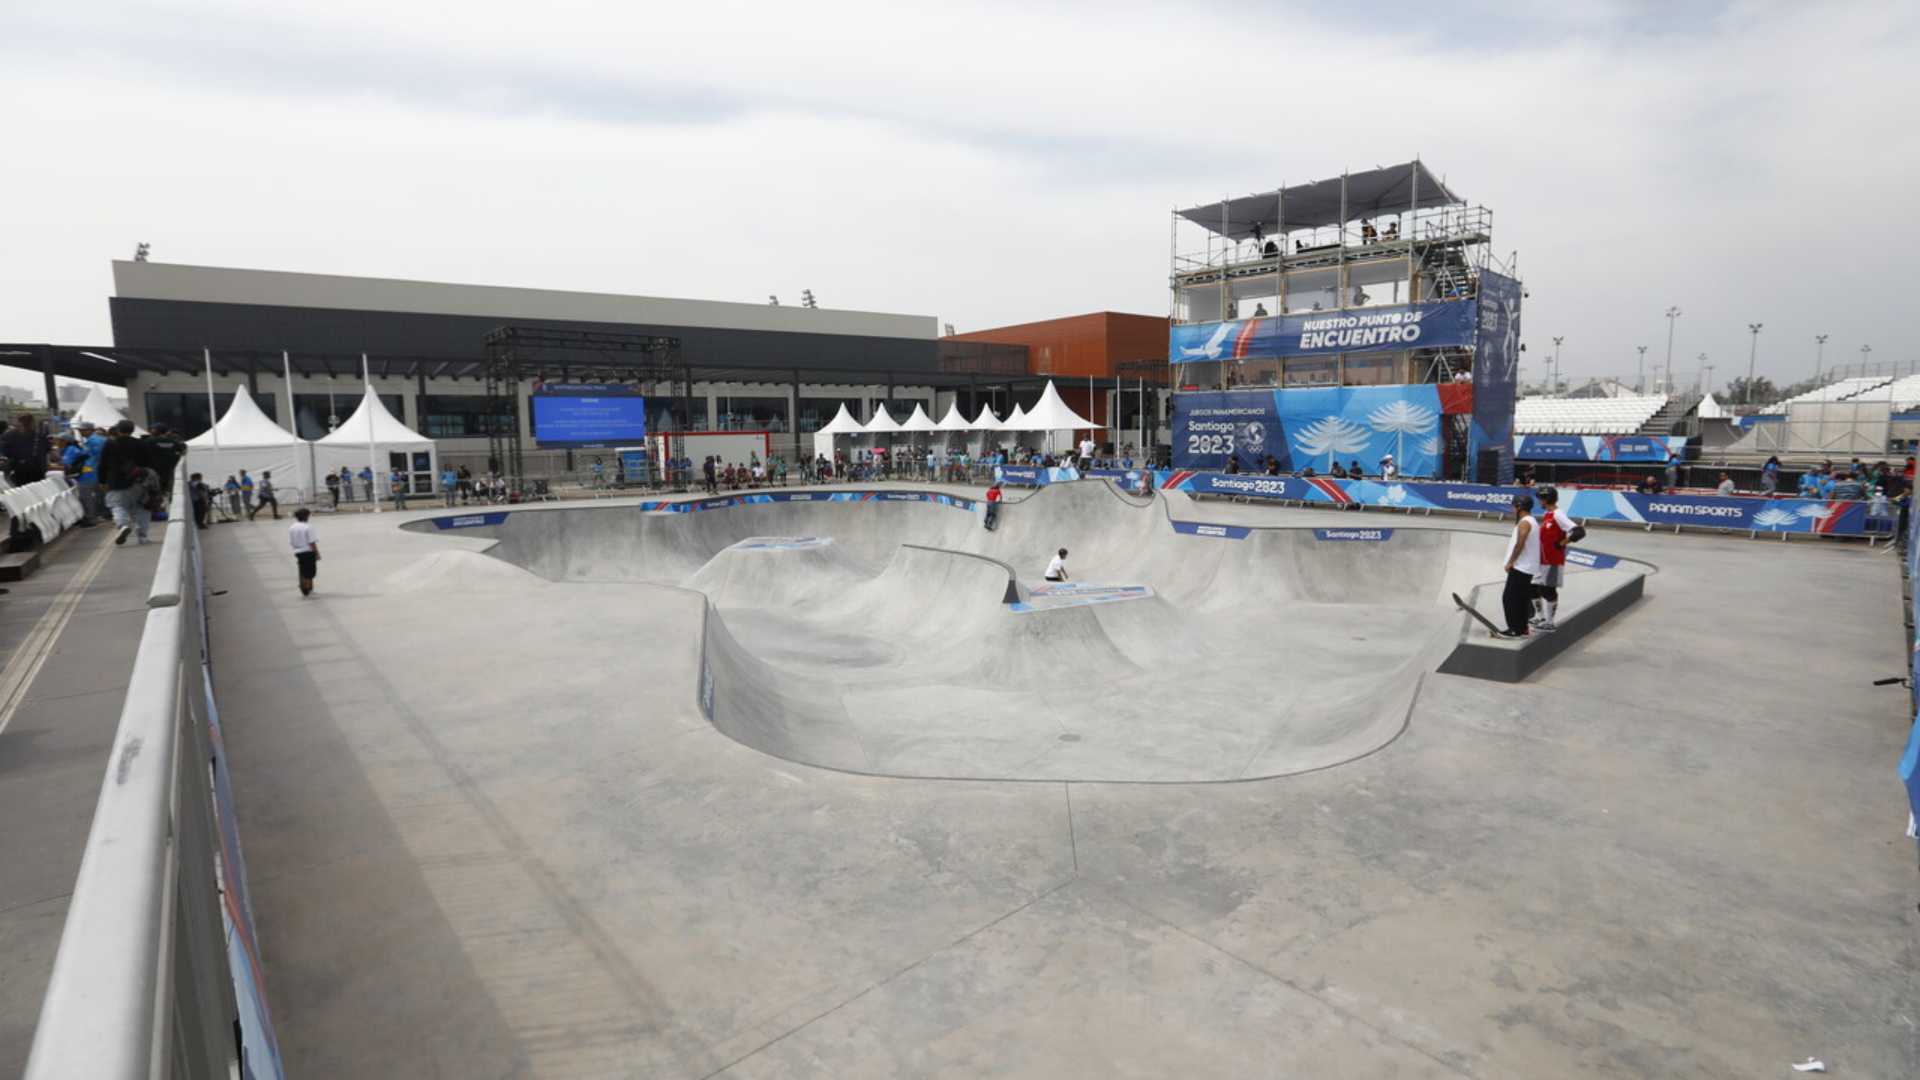 Taylor Nye is First Champion in Pan American Skate Park History